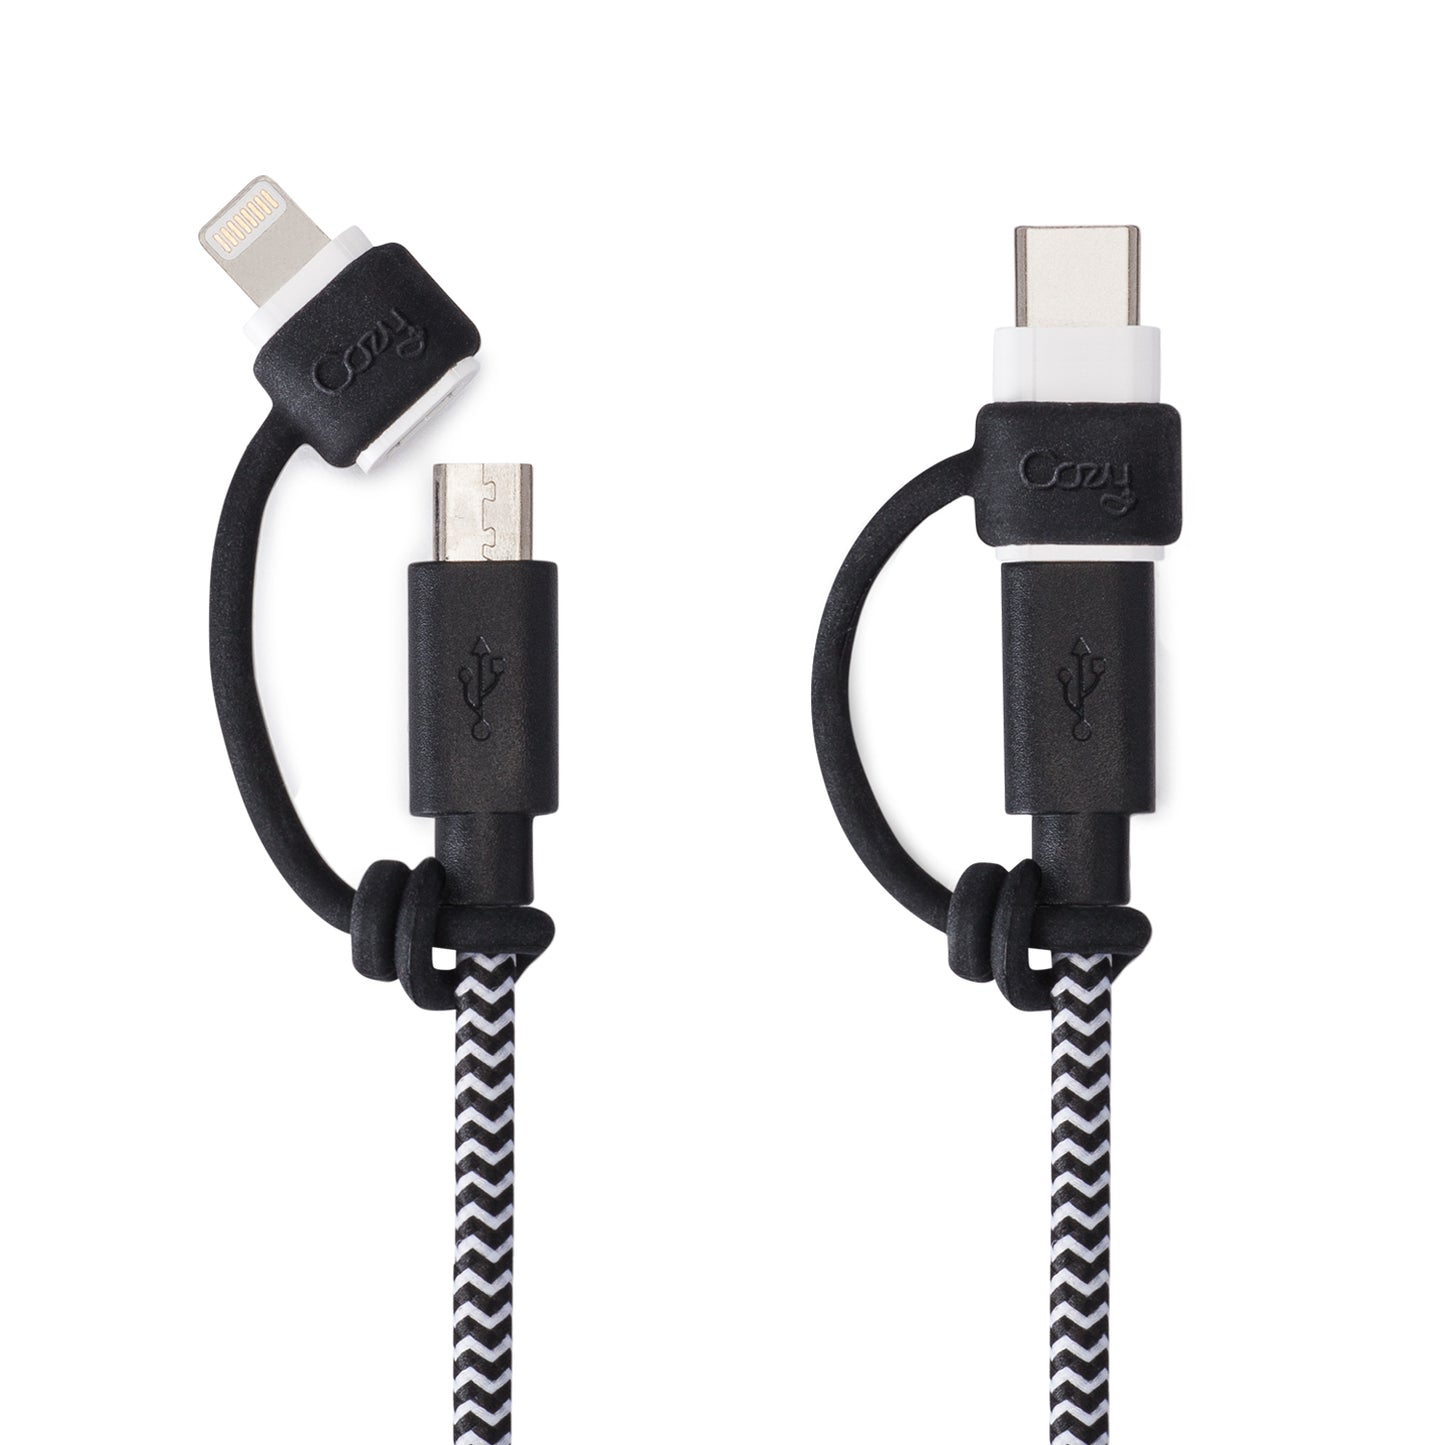 LightningCozy secure Apple Lightning to Micro USB and USB-C adapter easy gadget and solution for not getting lost adapters charging syncing all Apple devices iPods iPads iPhones Kindles and Androids